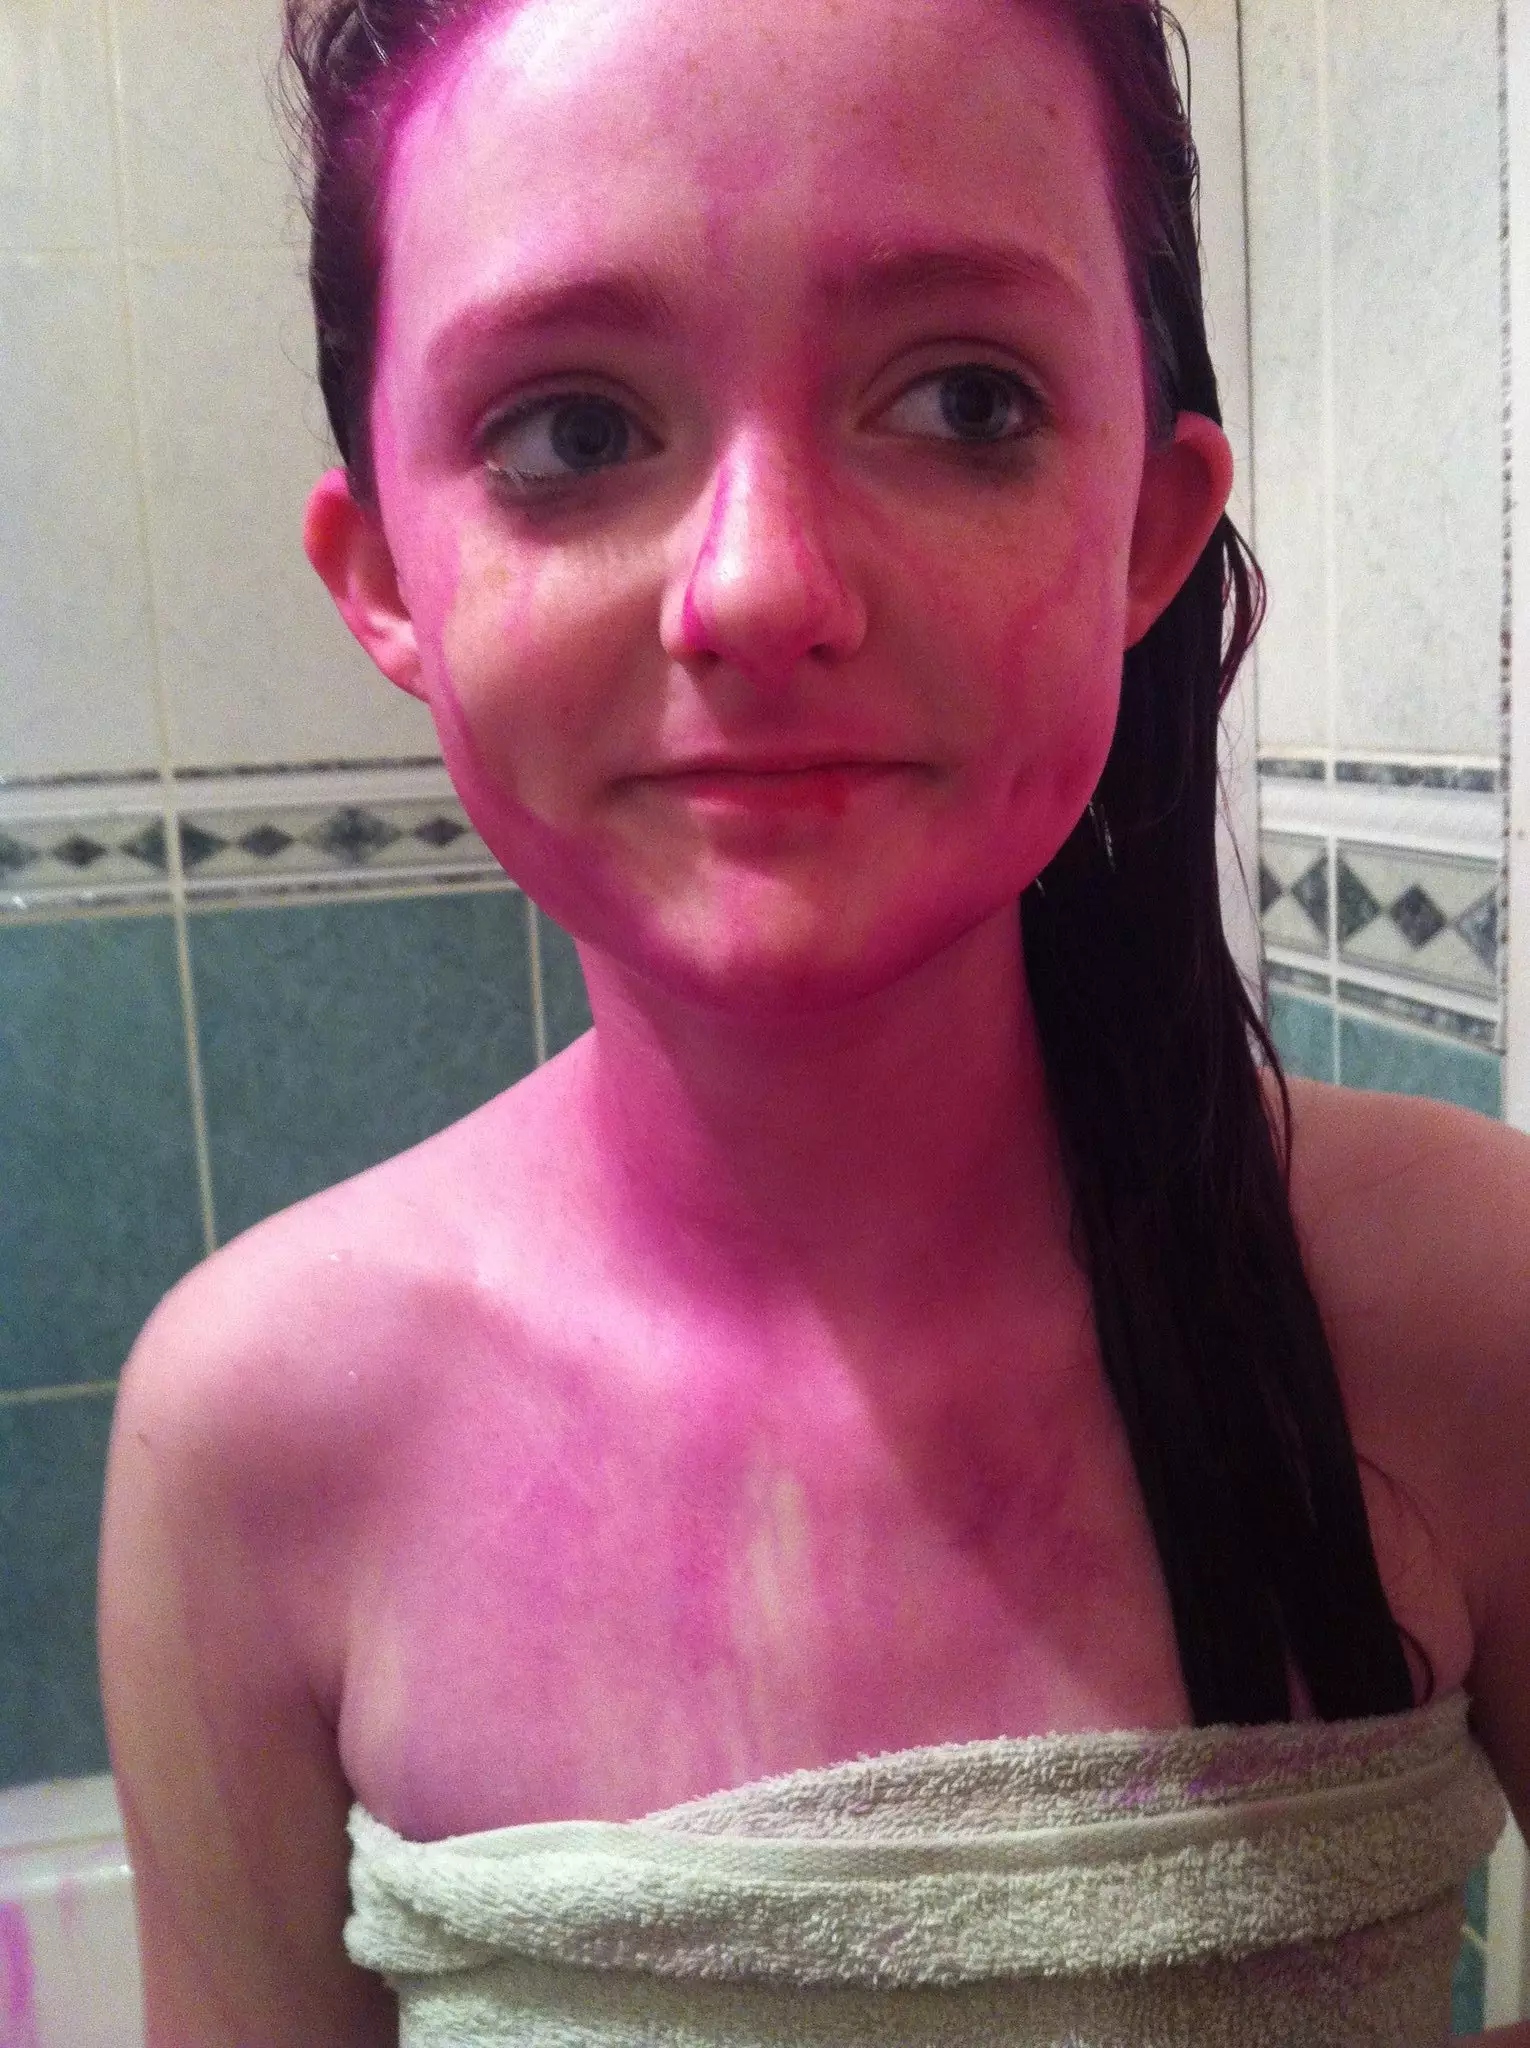 Ava managed to turn herself entirely purple (